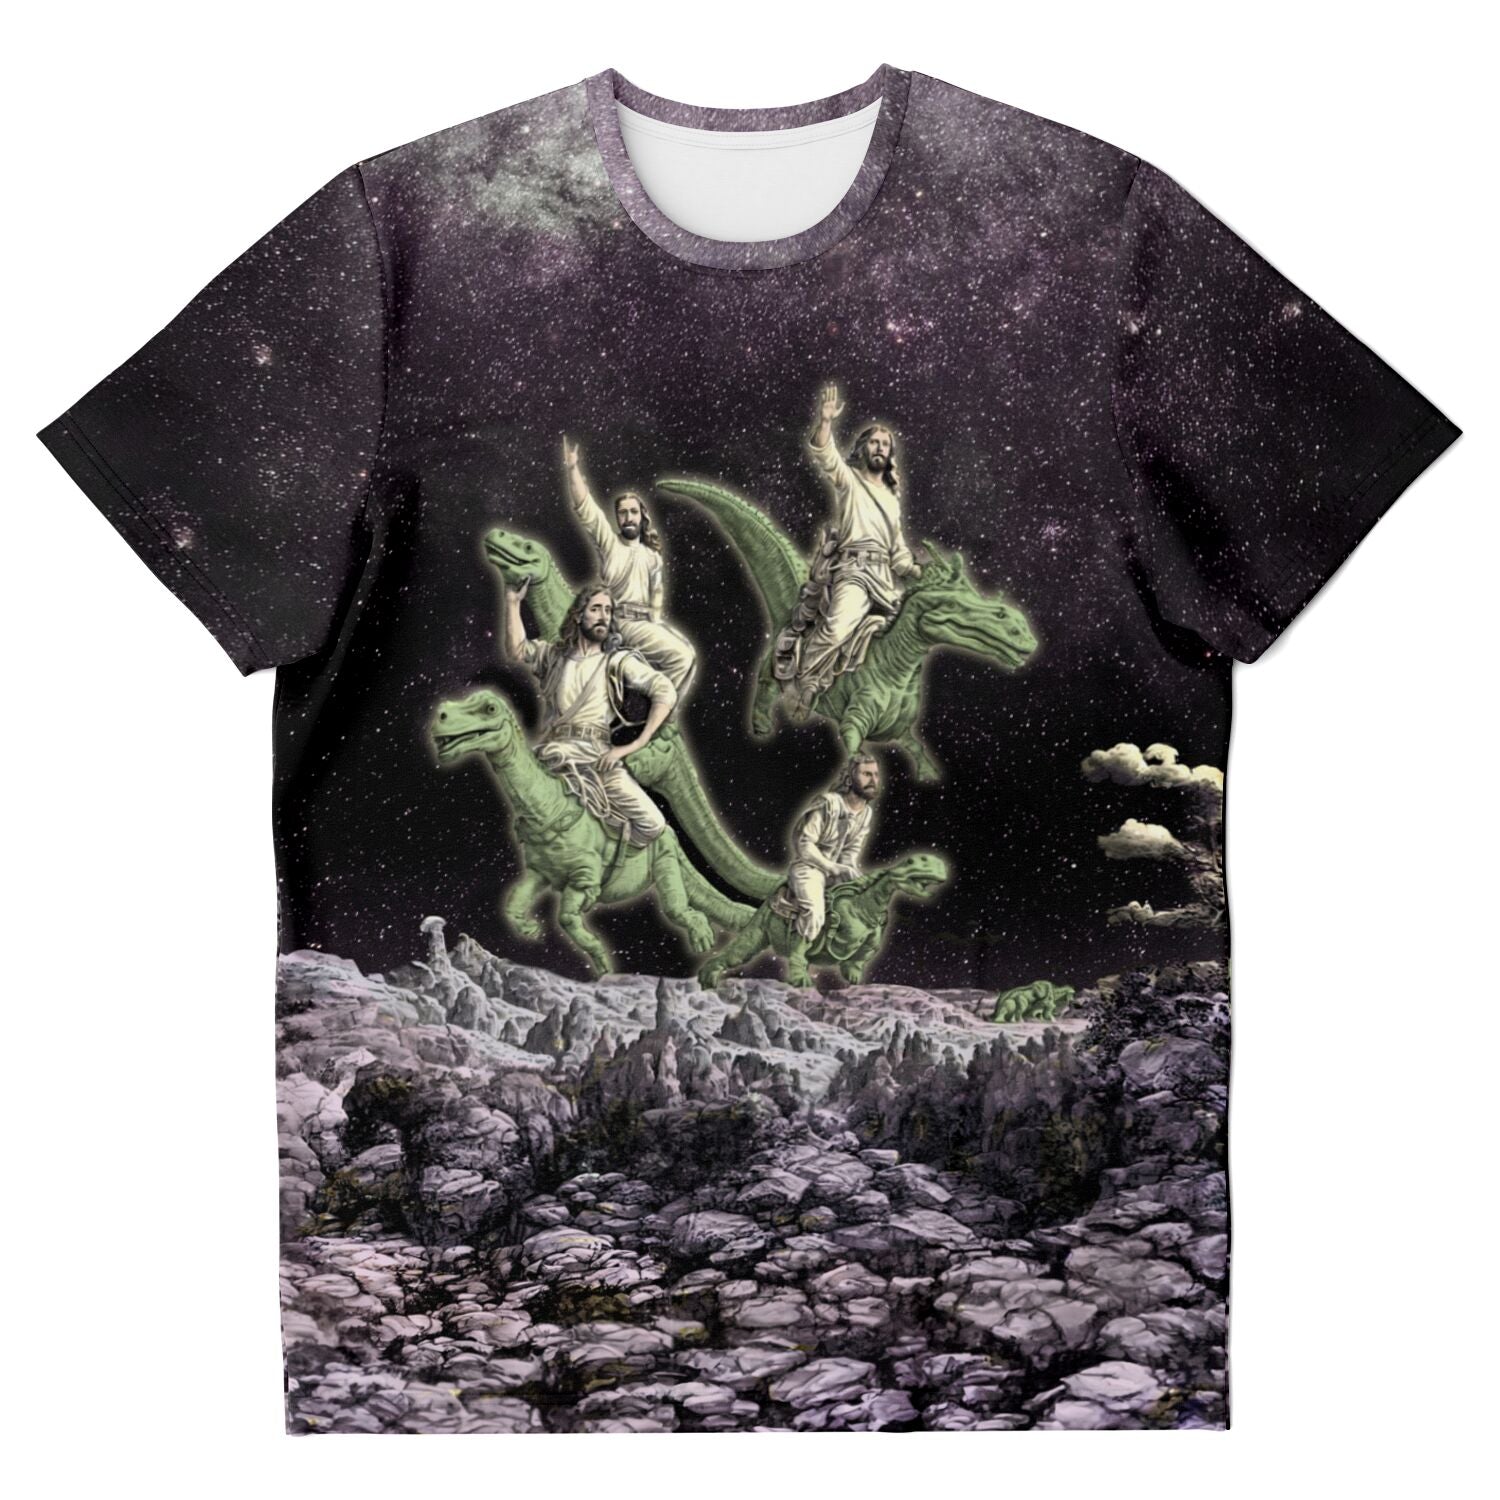 T-shirt XS Disco Jesus and the Dinosaurs Funny Fantasy Atheist Tee | Surreal Galaxy Collage Graphic Art T-Shirt